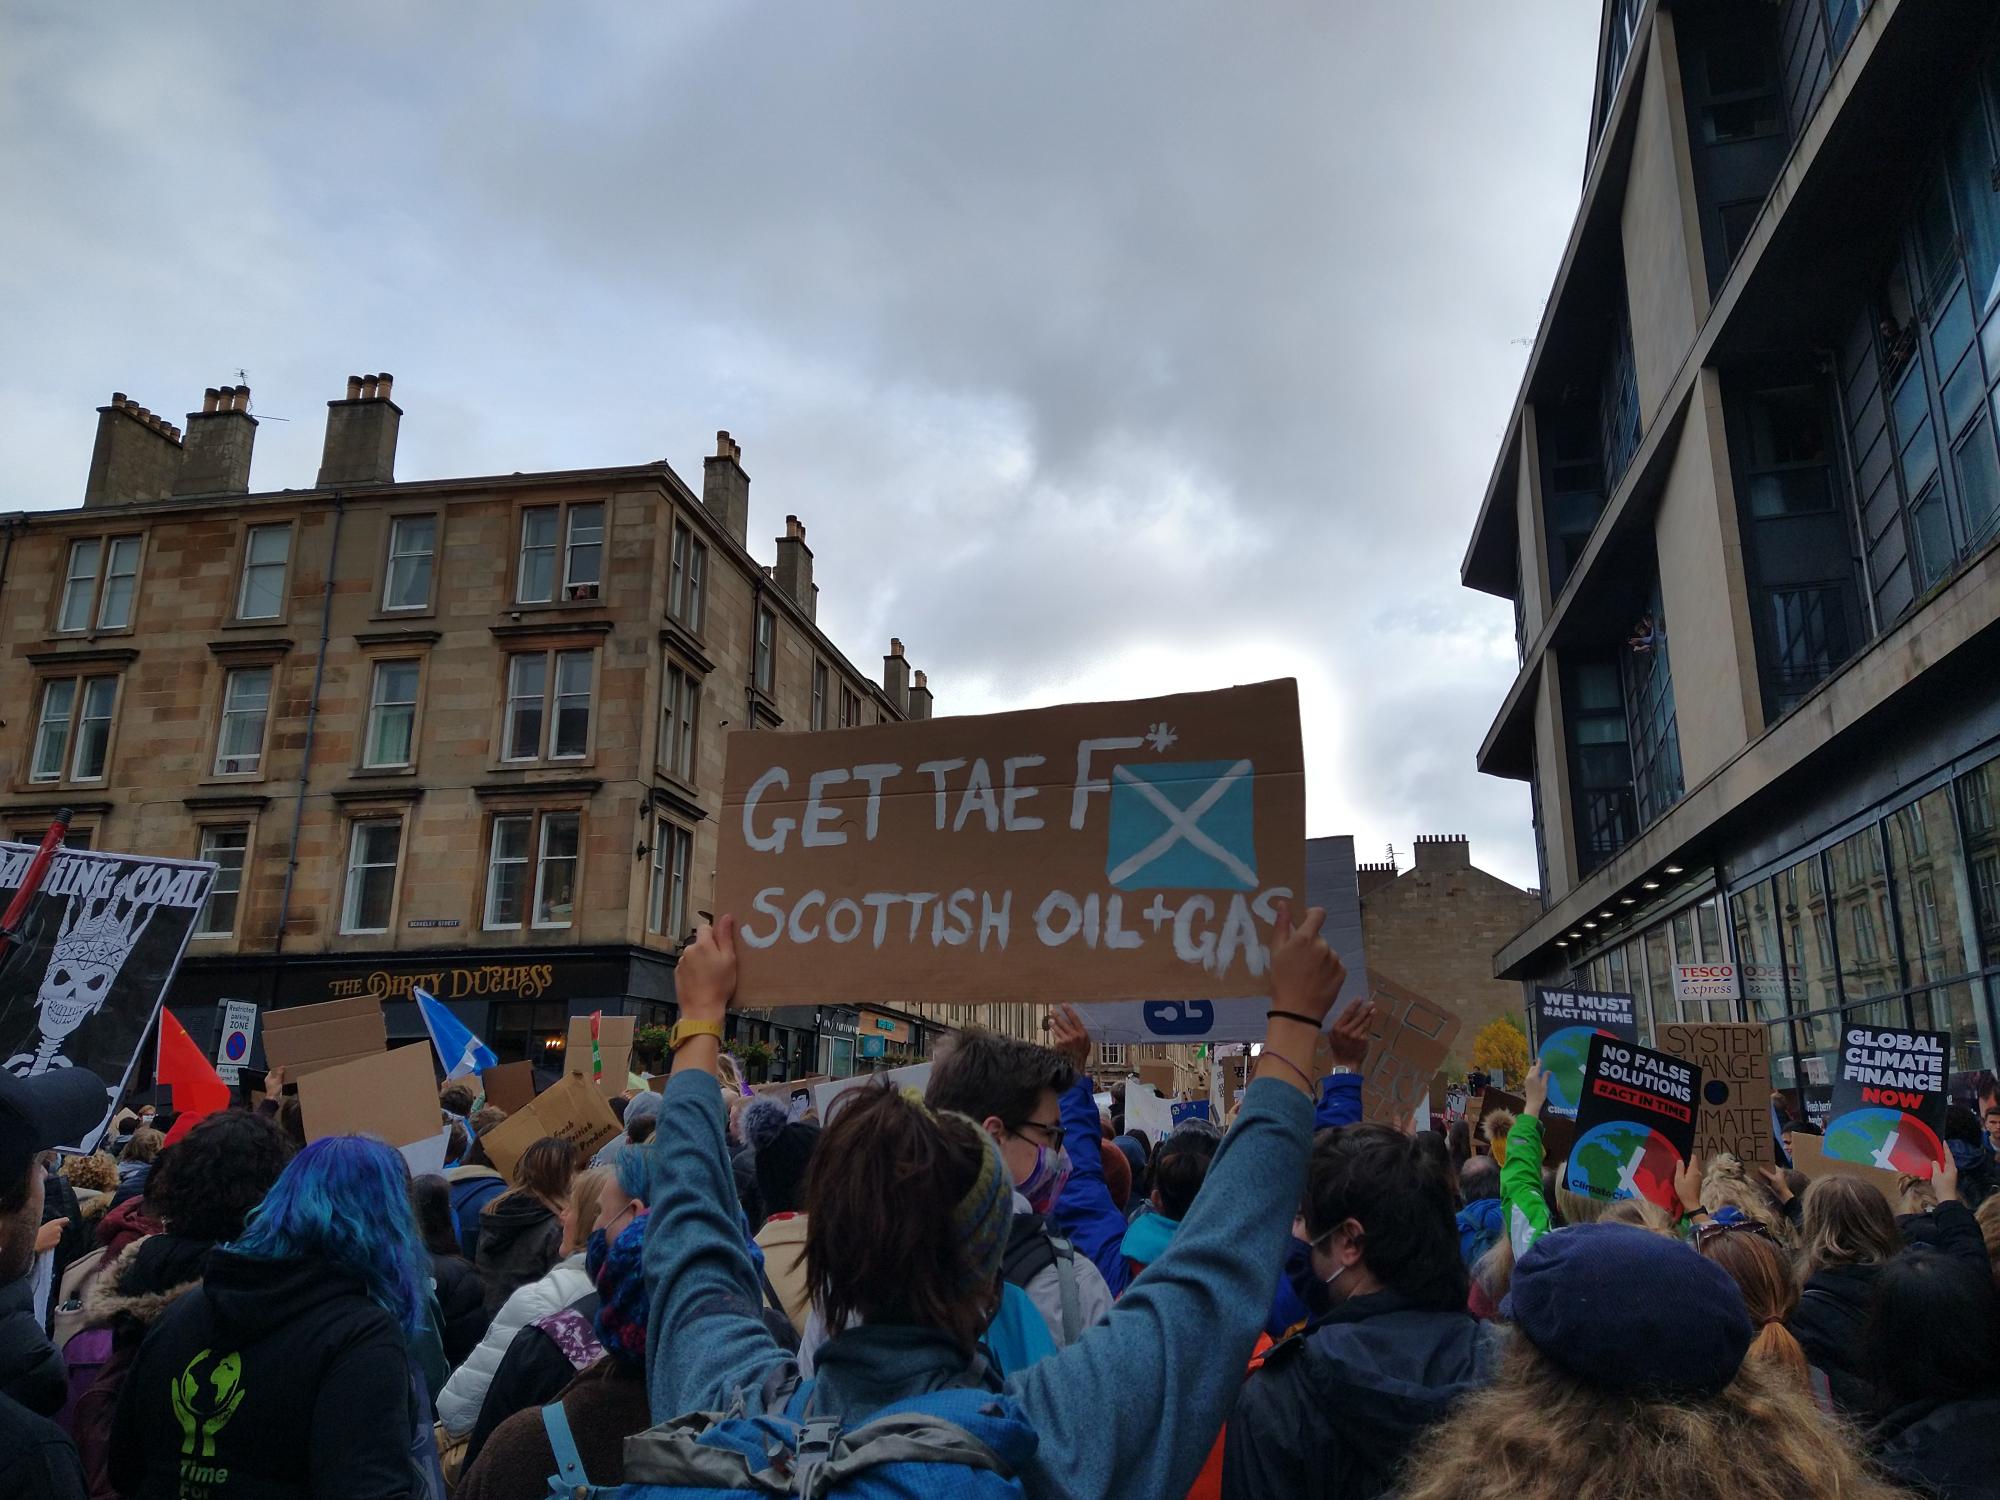 Thousands of protesters are taking place in the march. Image: Sarah Wilson